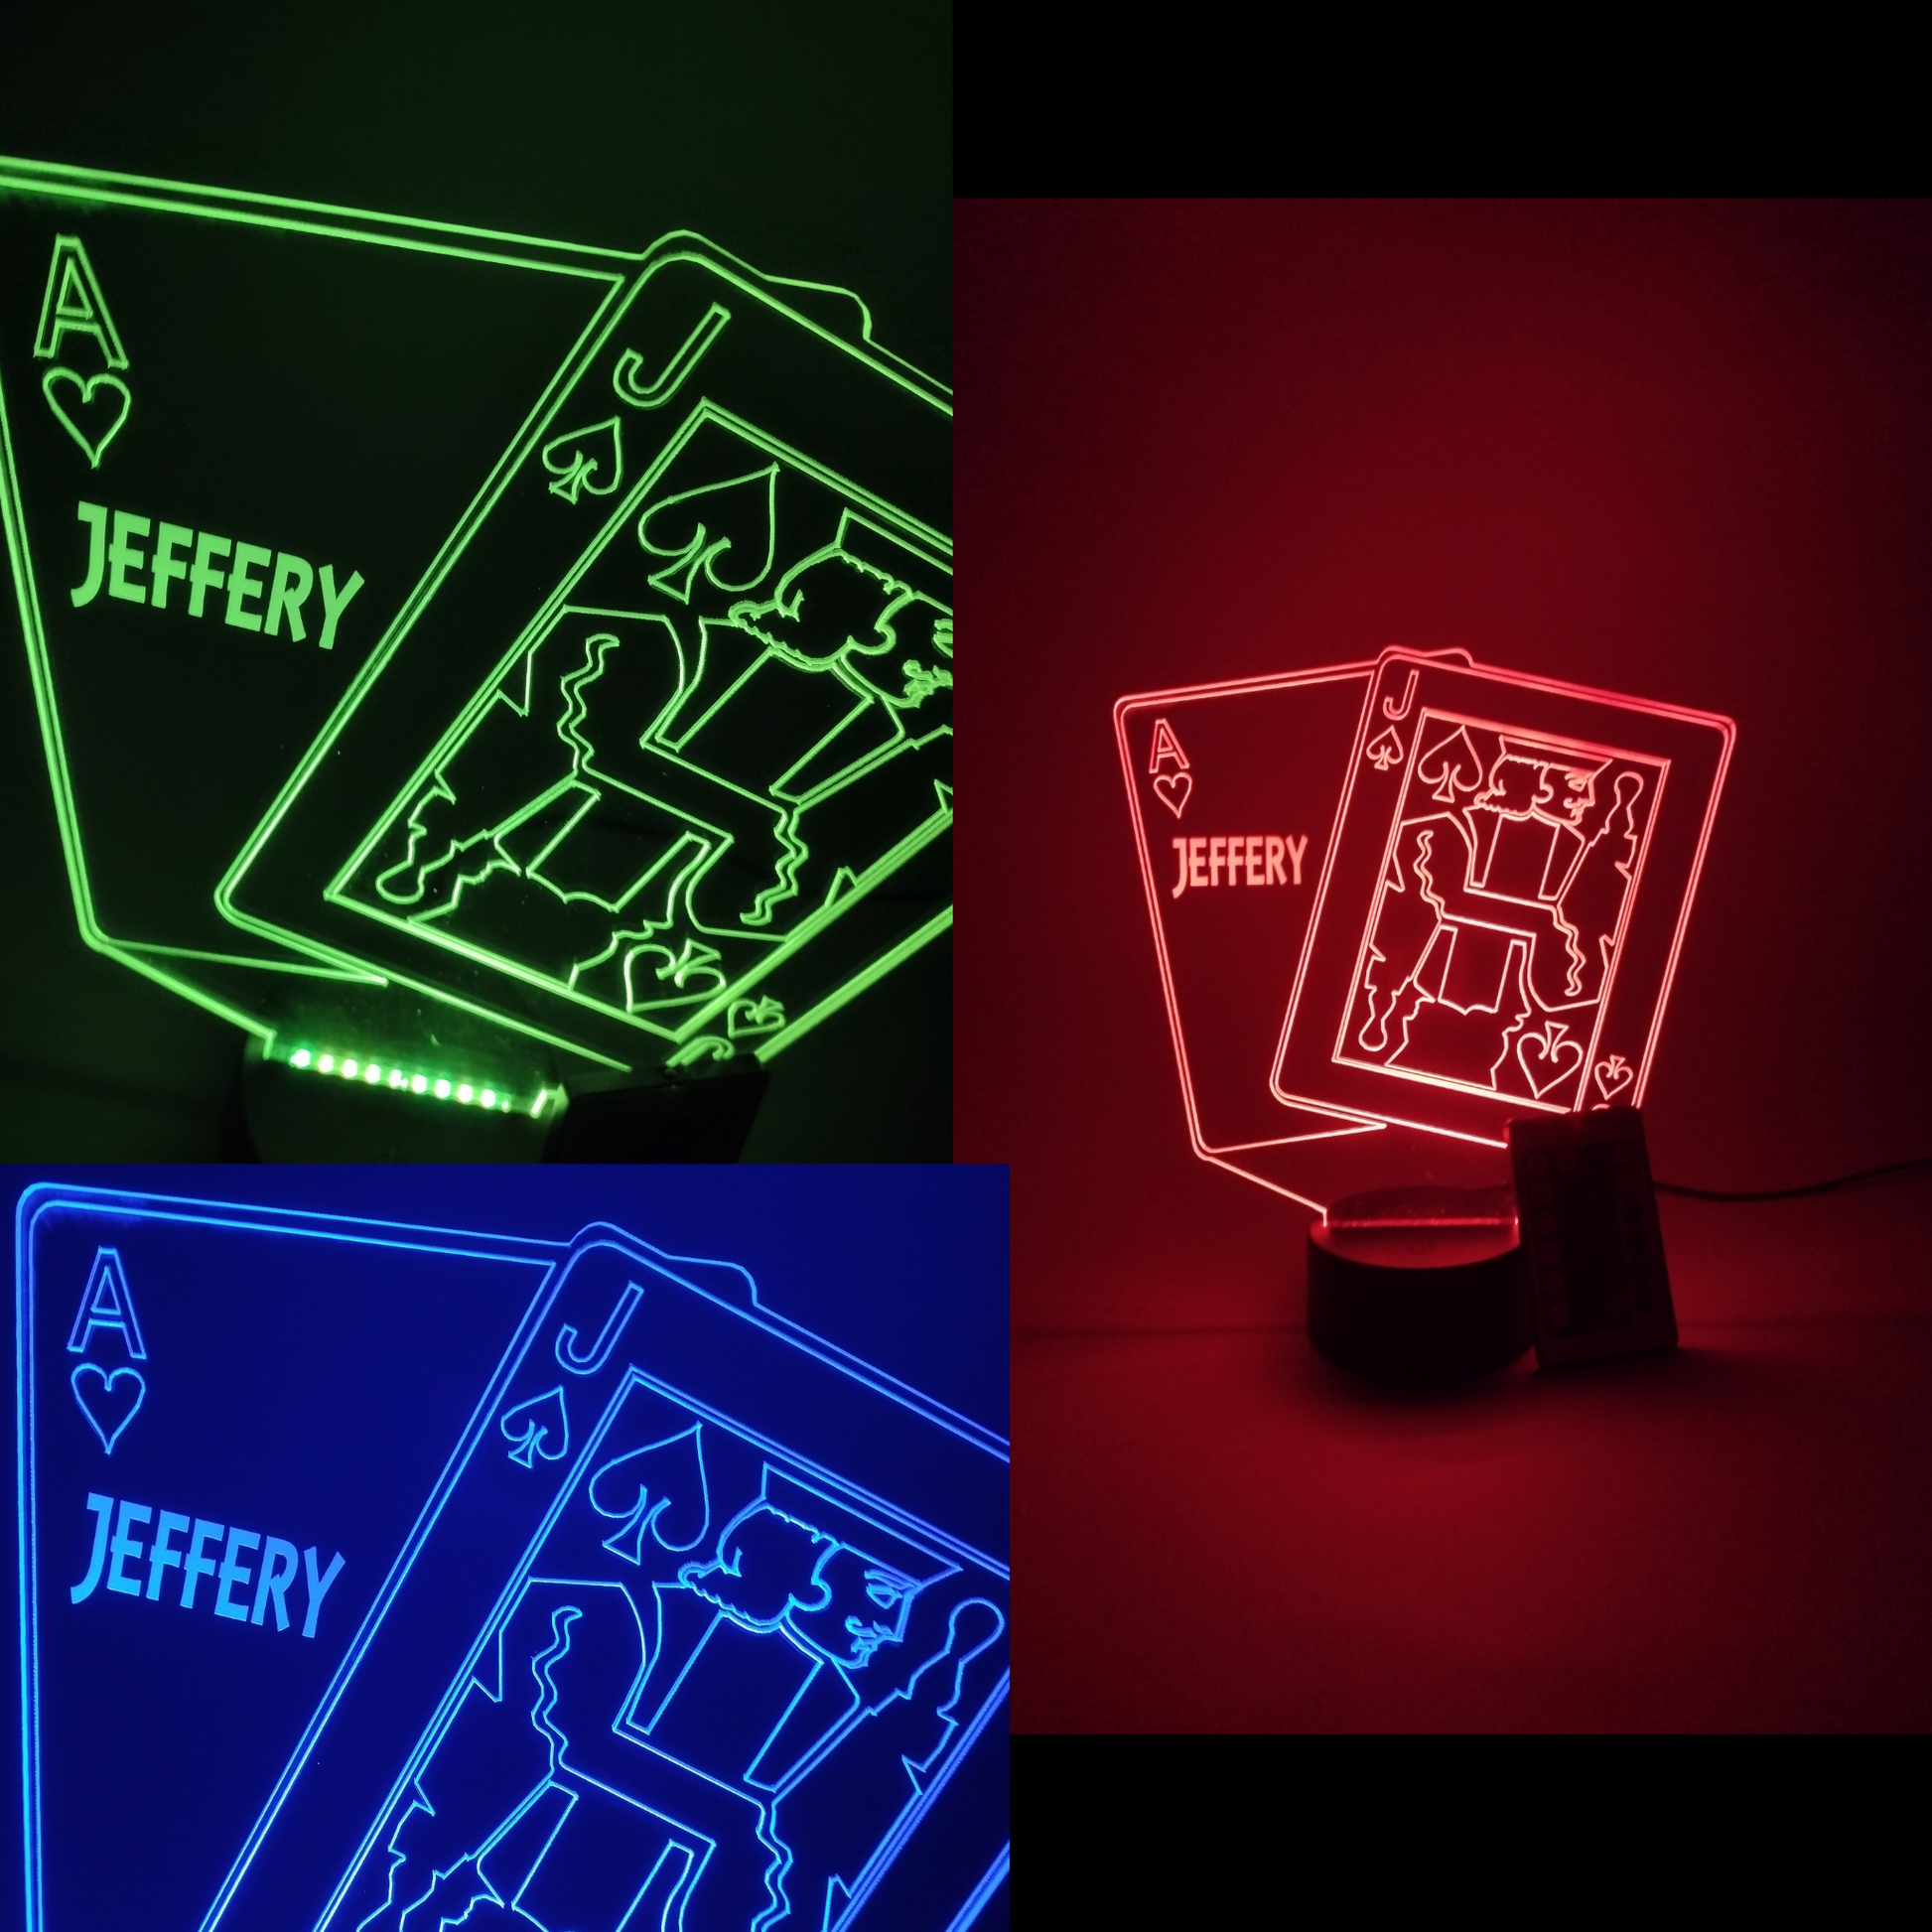 Ace and Jack Blackjack Playing Cards Night Light Up Lamp LED Personalized Black Jack Desk Table Lamp with Remote, 16 Colors, Free Engraved